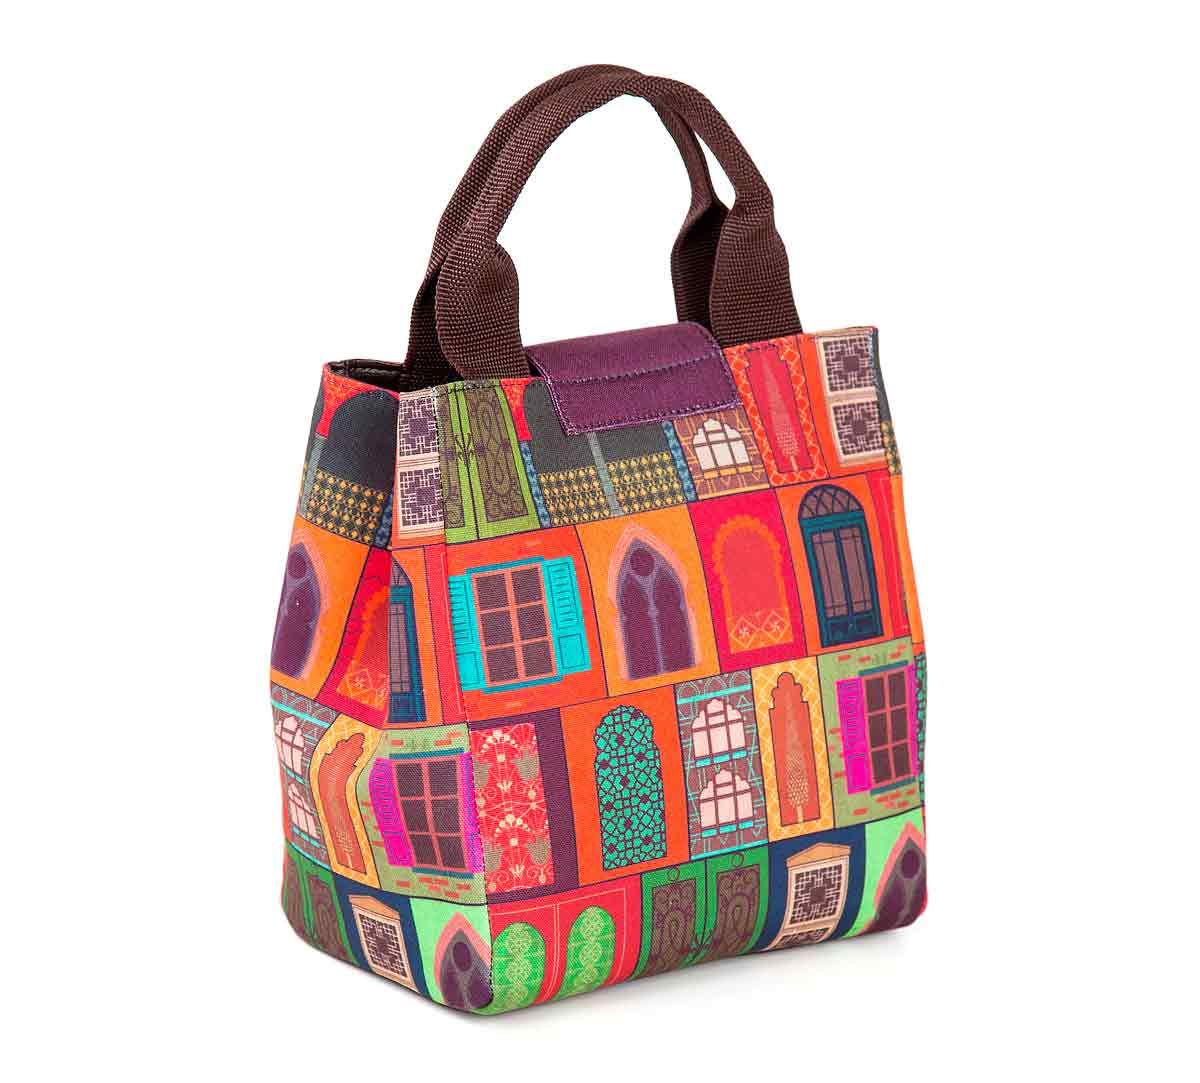 Affordable designer lunch bags for women - indiacircus.com